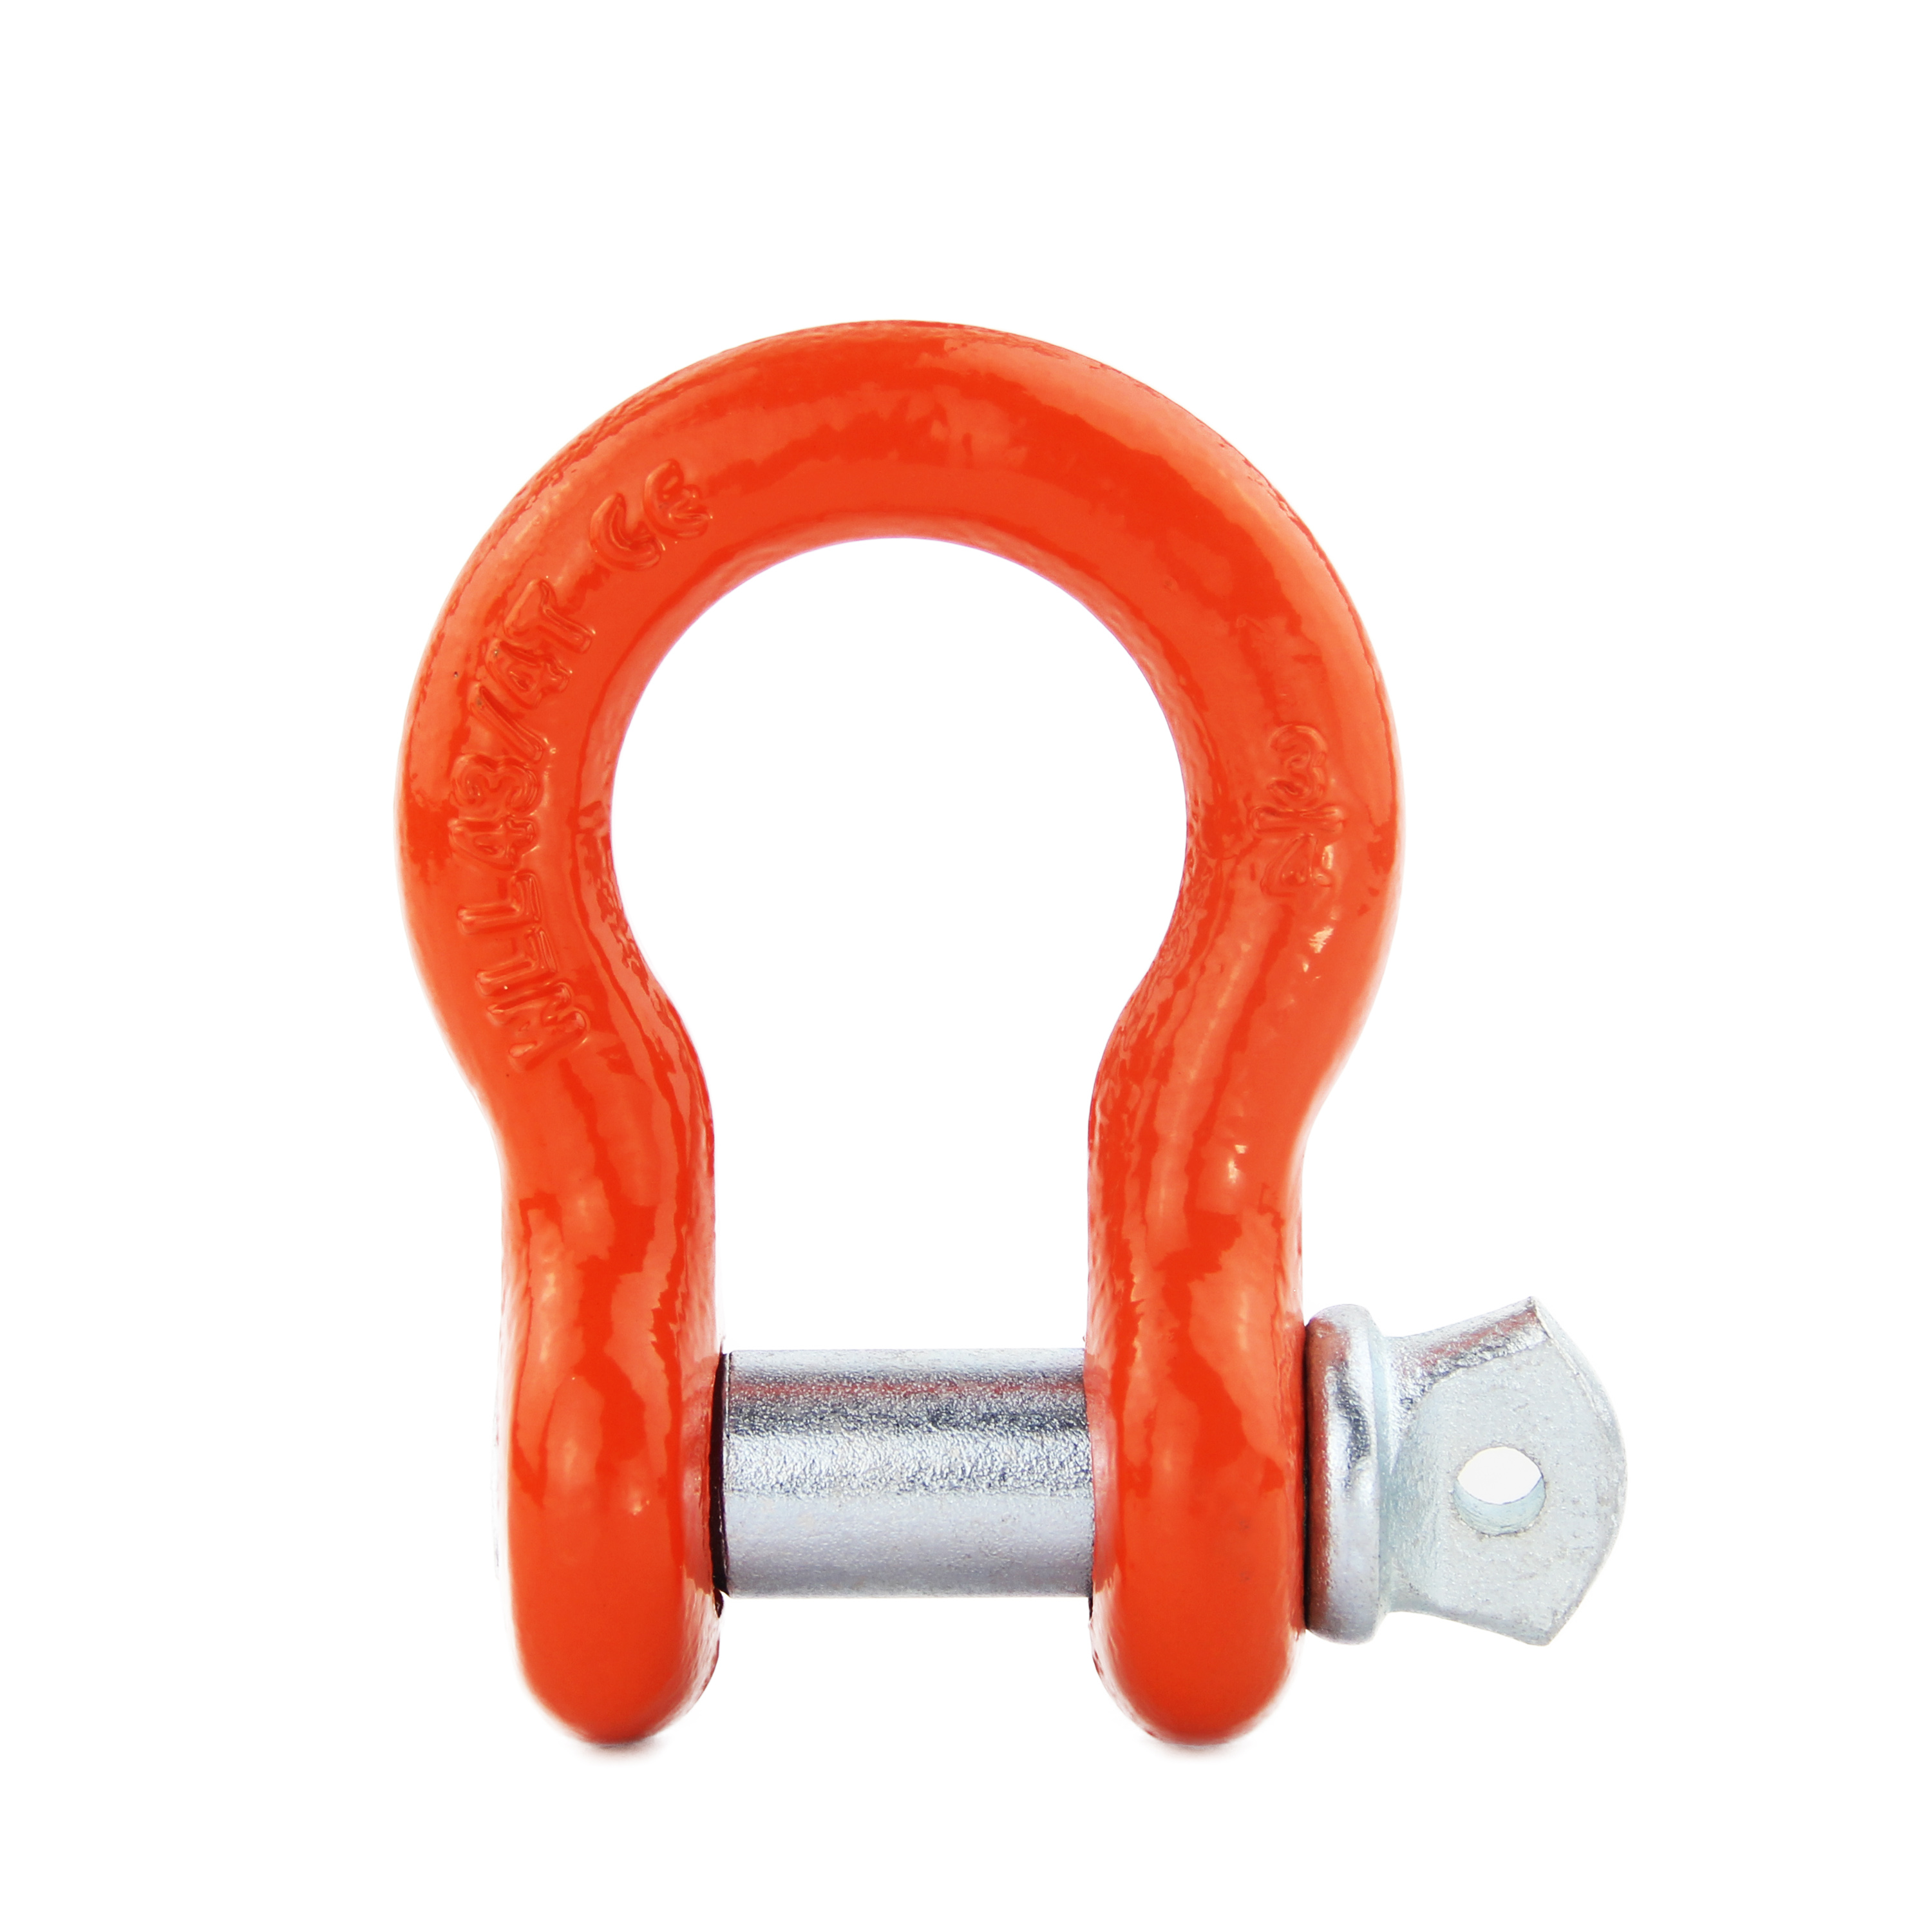 Rugged 4.75T Shackle with Shackle Isolator and Washer